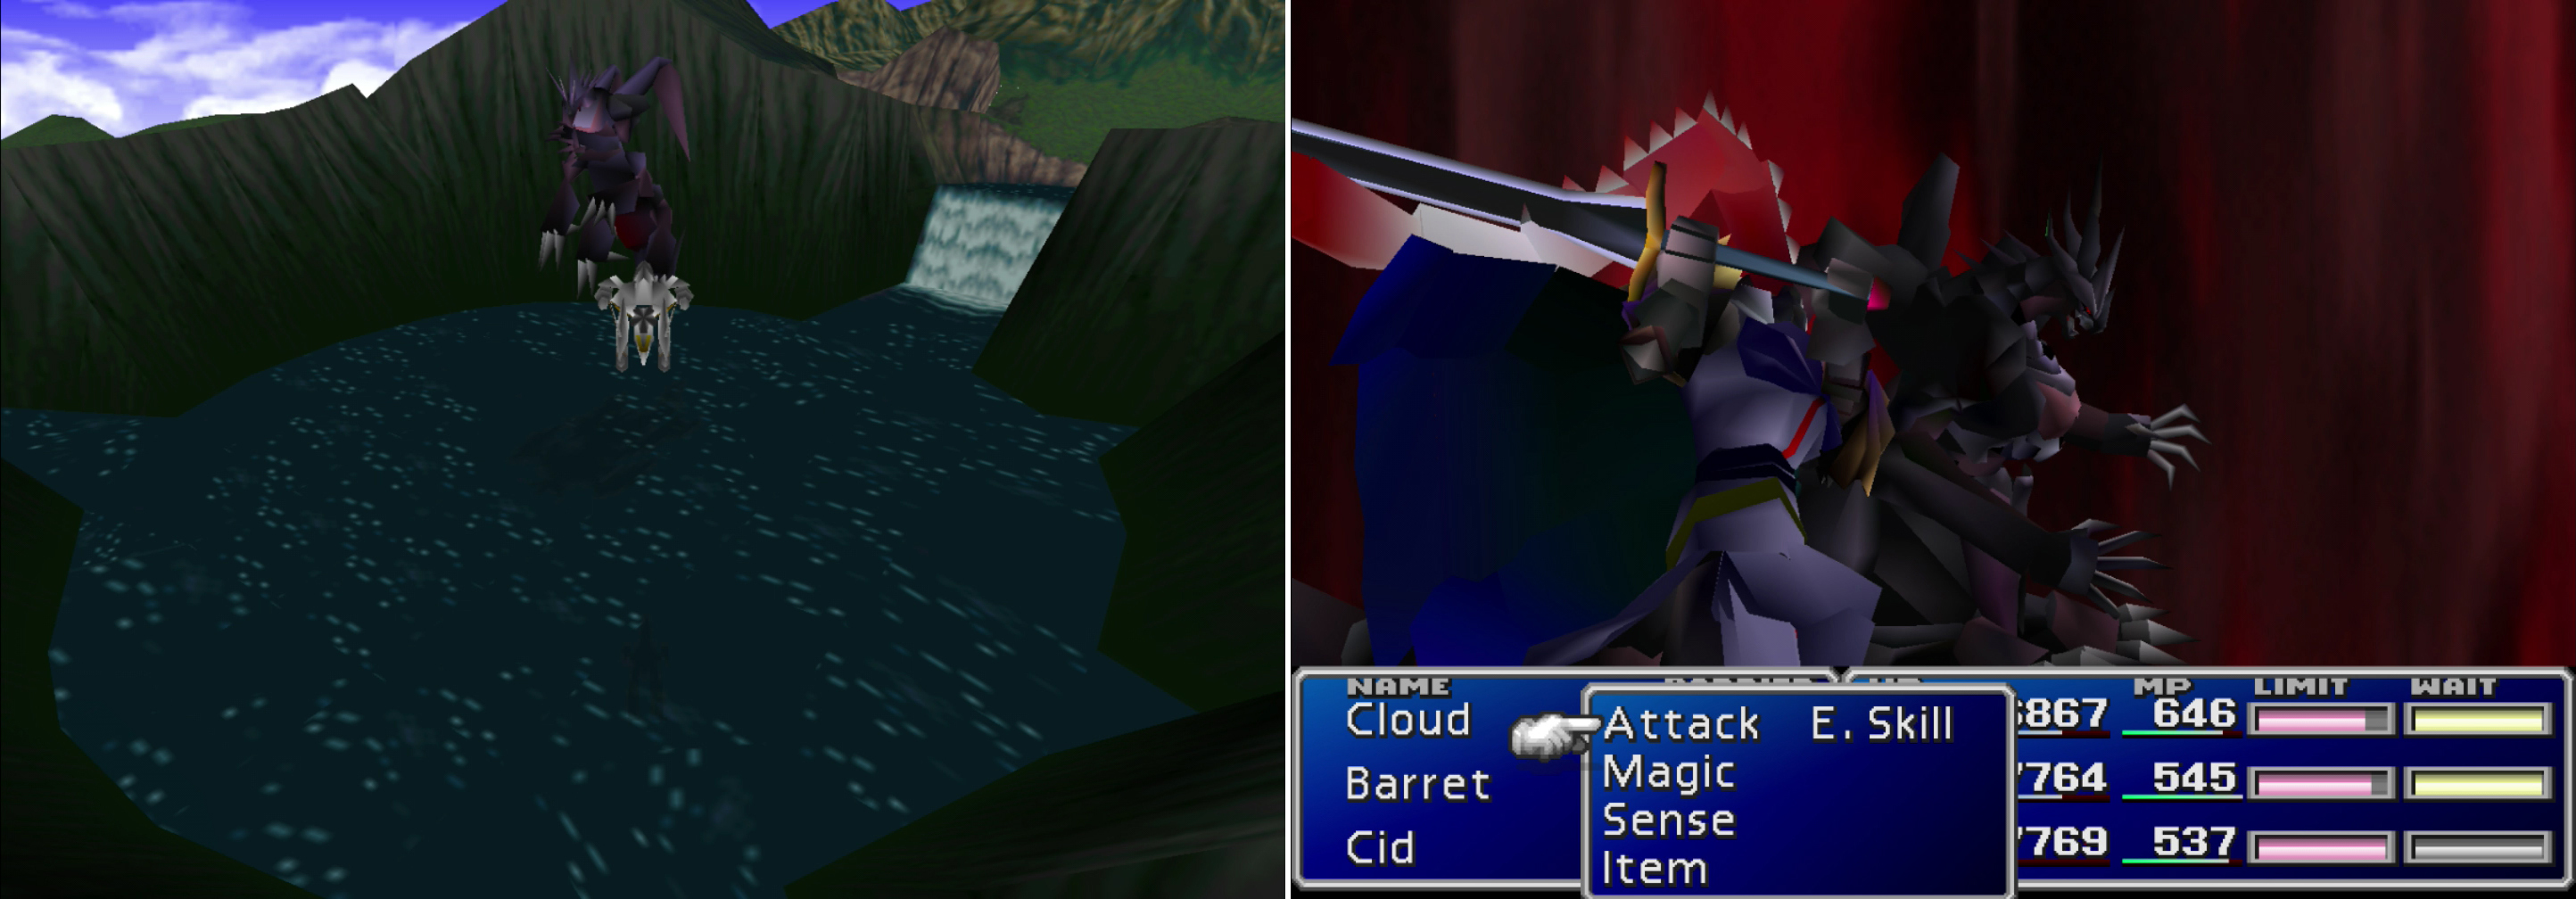 Find Ultimate Weapon biding its time in a crater near Junon (left). Normally you have to engage the monster in multiple encounters, but one good casting of Knights of the Round will send Ultimate Weapon to the final encounter (right).